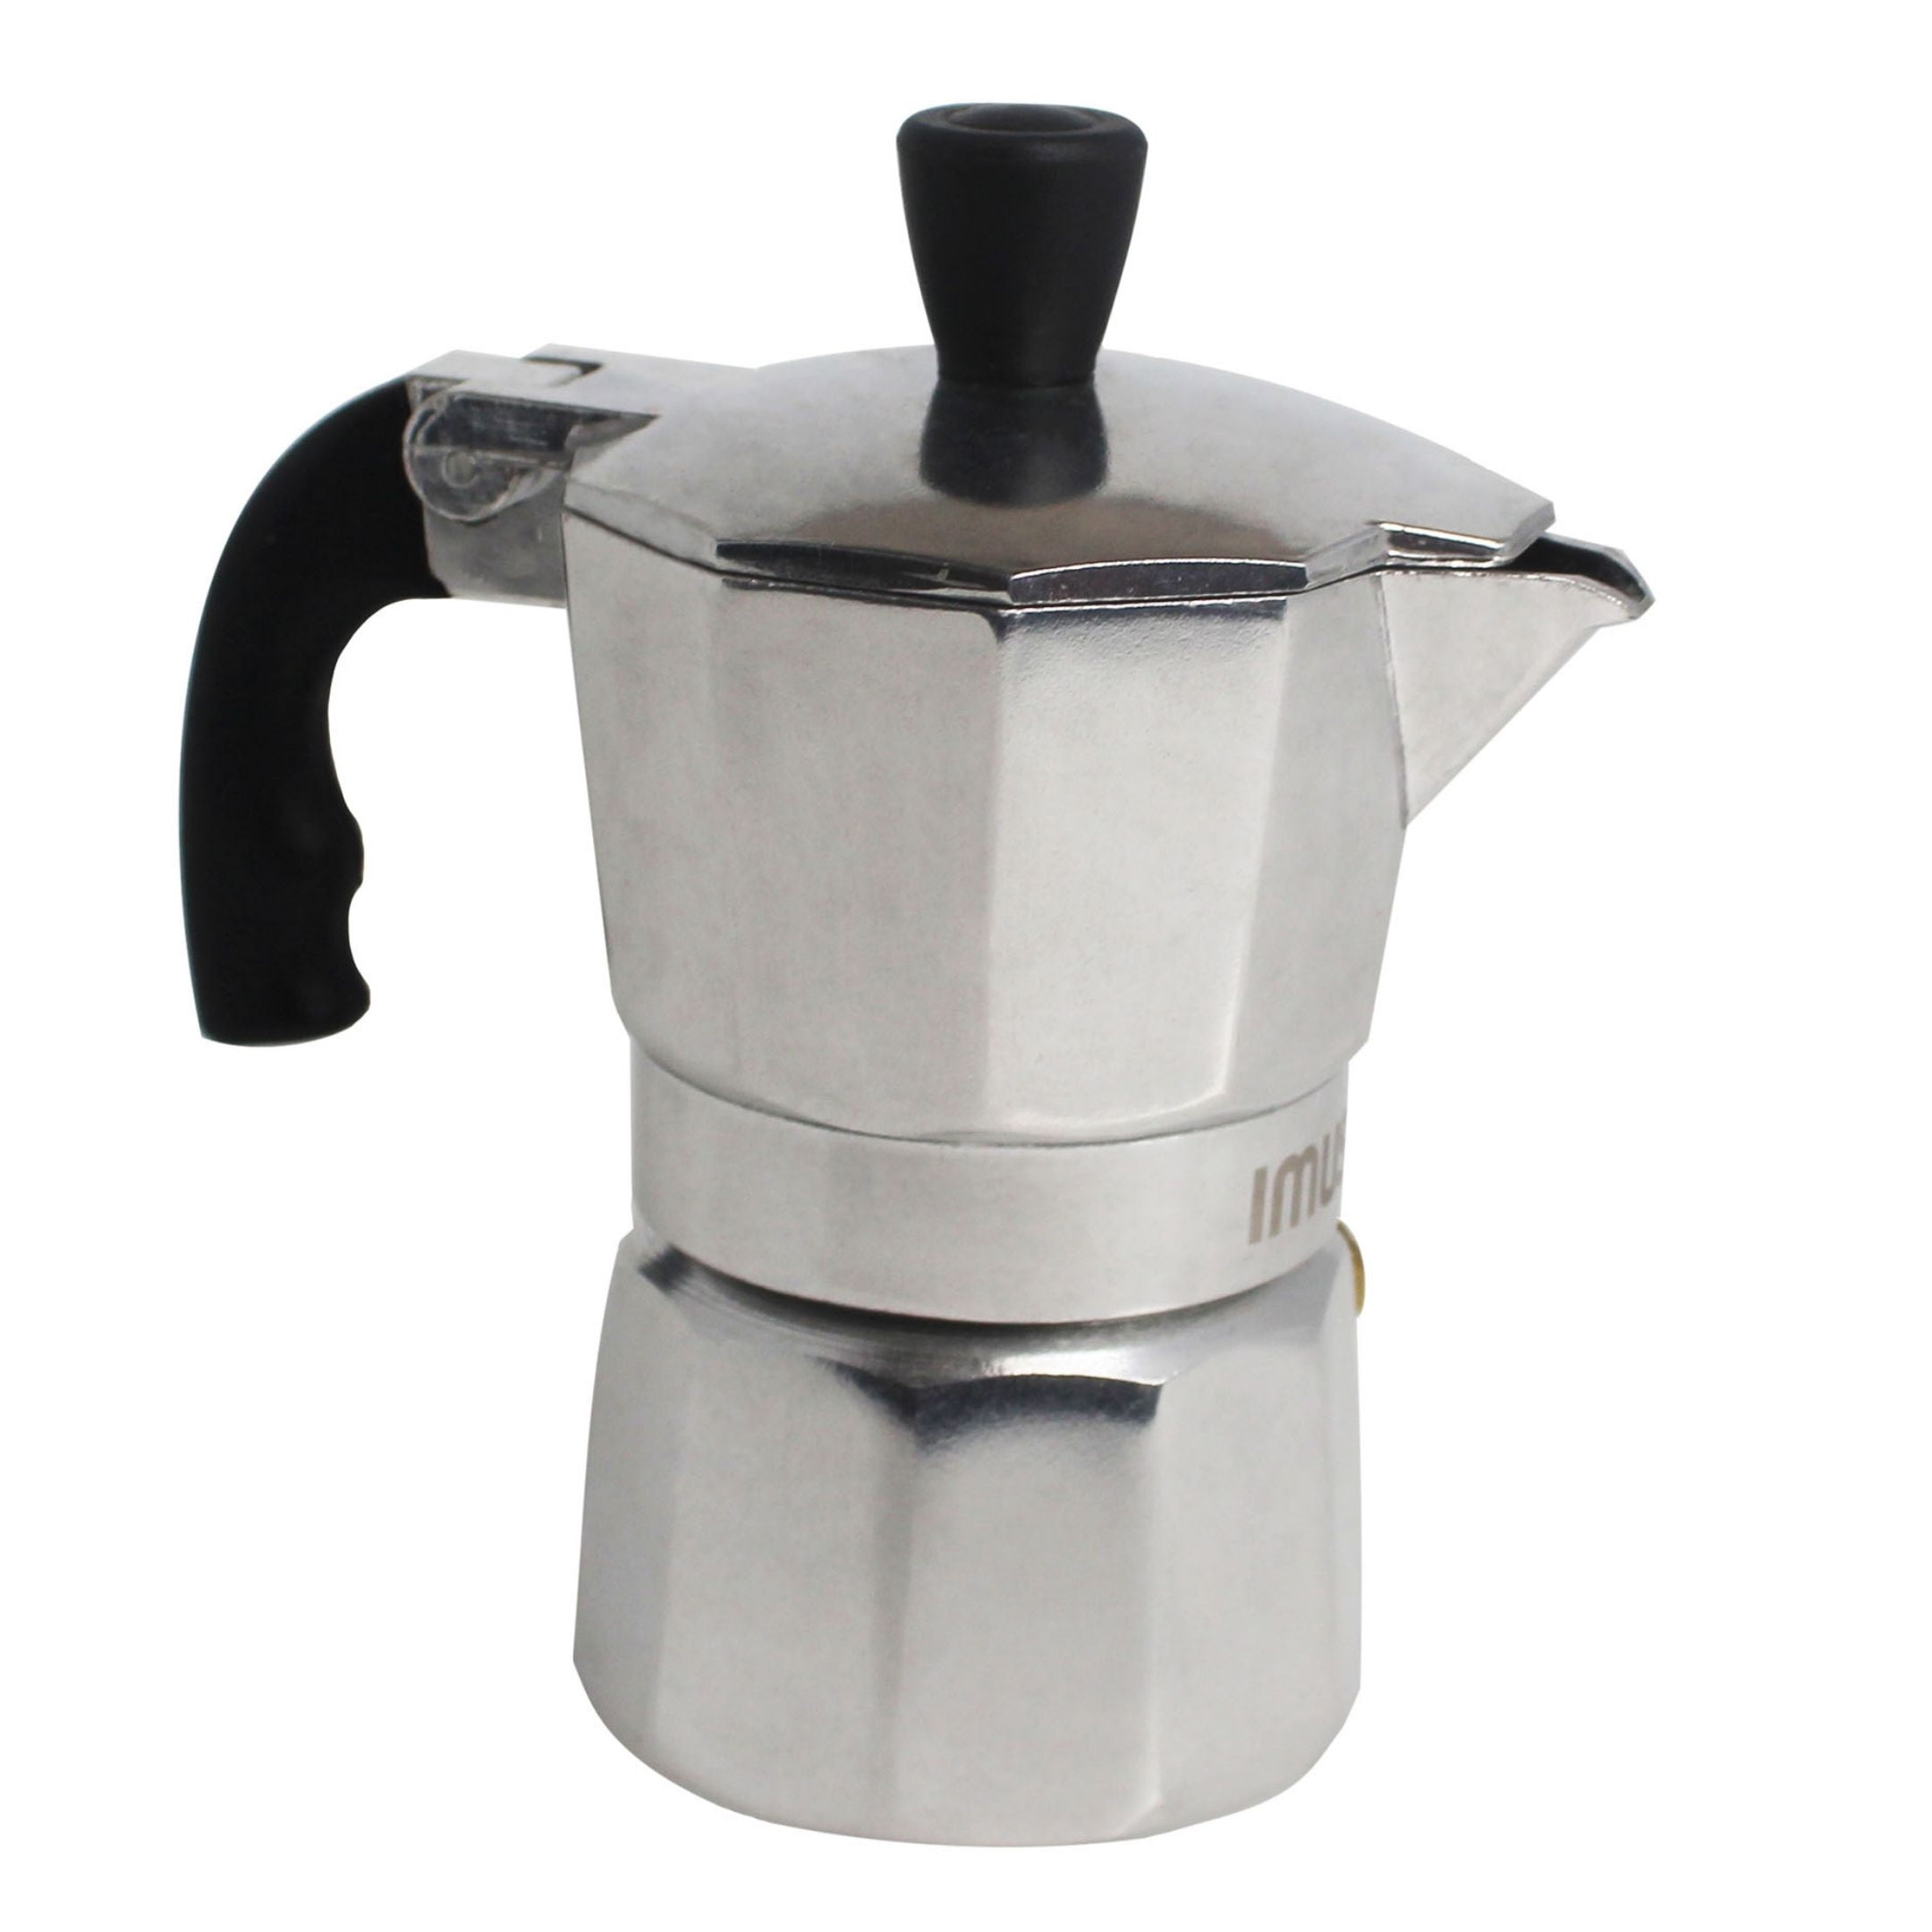 Imusa 9 Cup Traditional Aluminum Stovetop Coffeemaker -